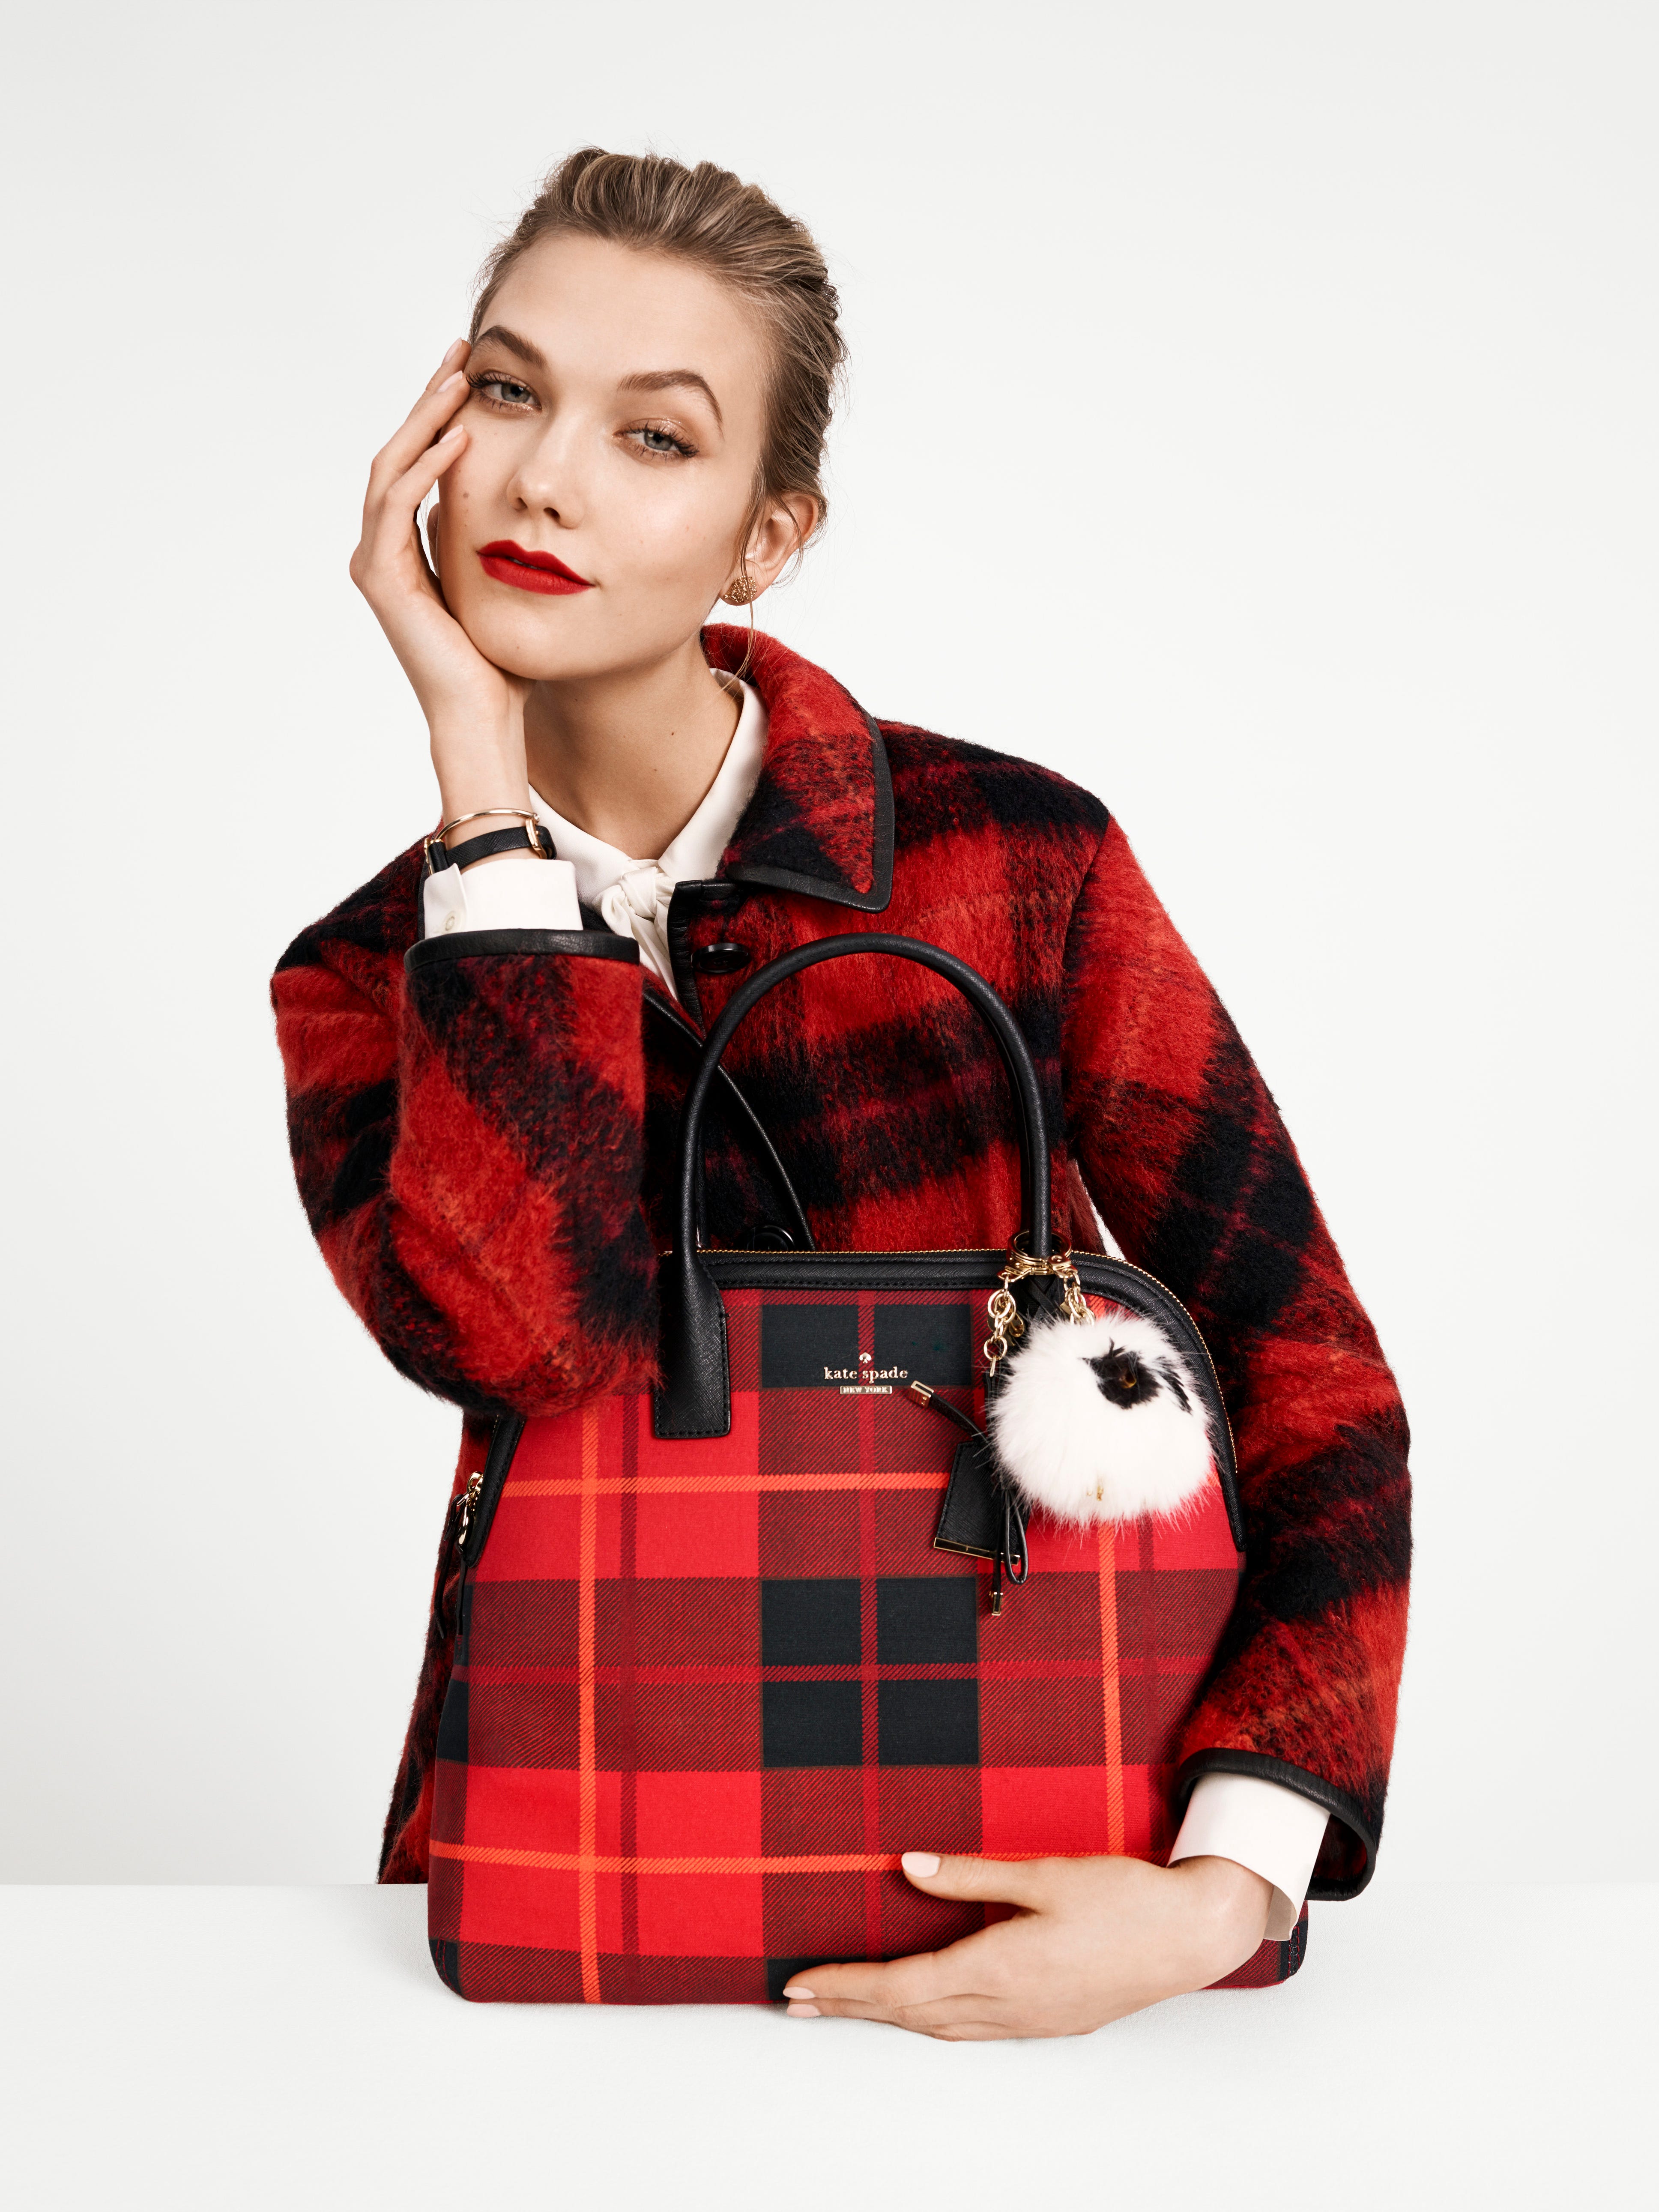 Karlie Kloss' cozy-cute Kate Spade campaign has us dreaming of fall